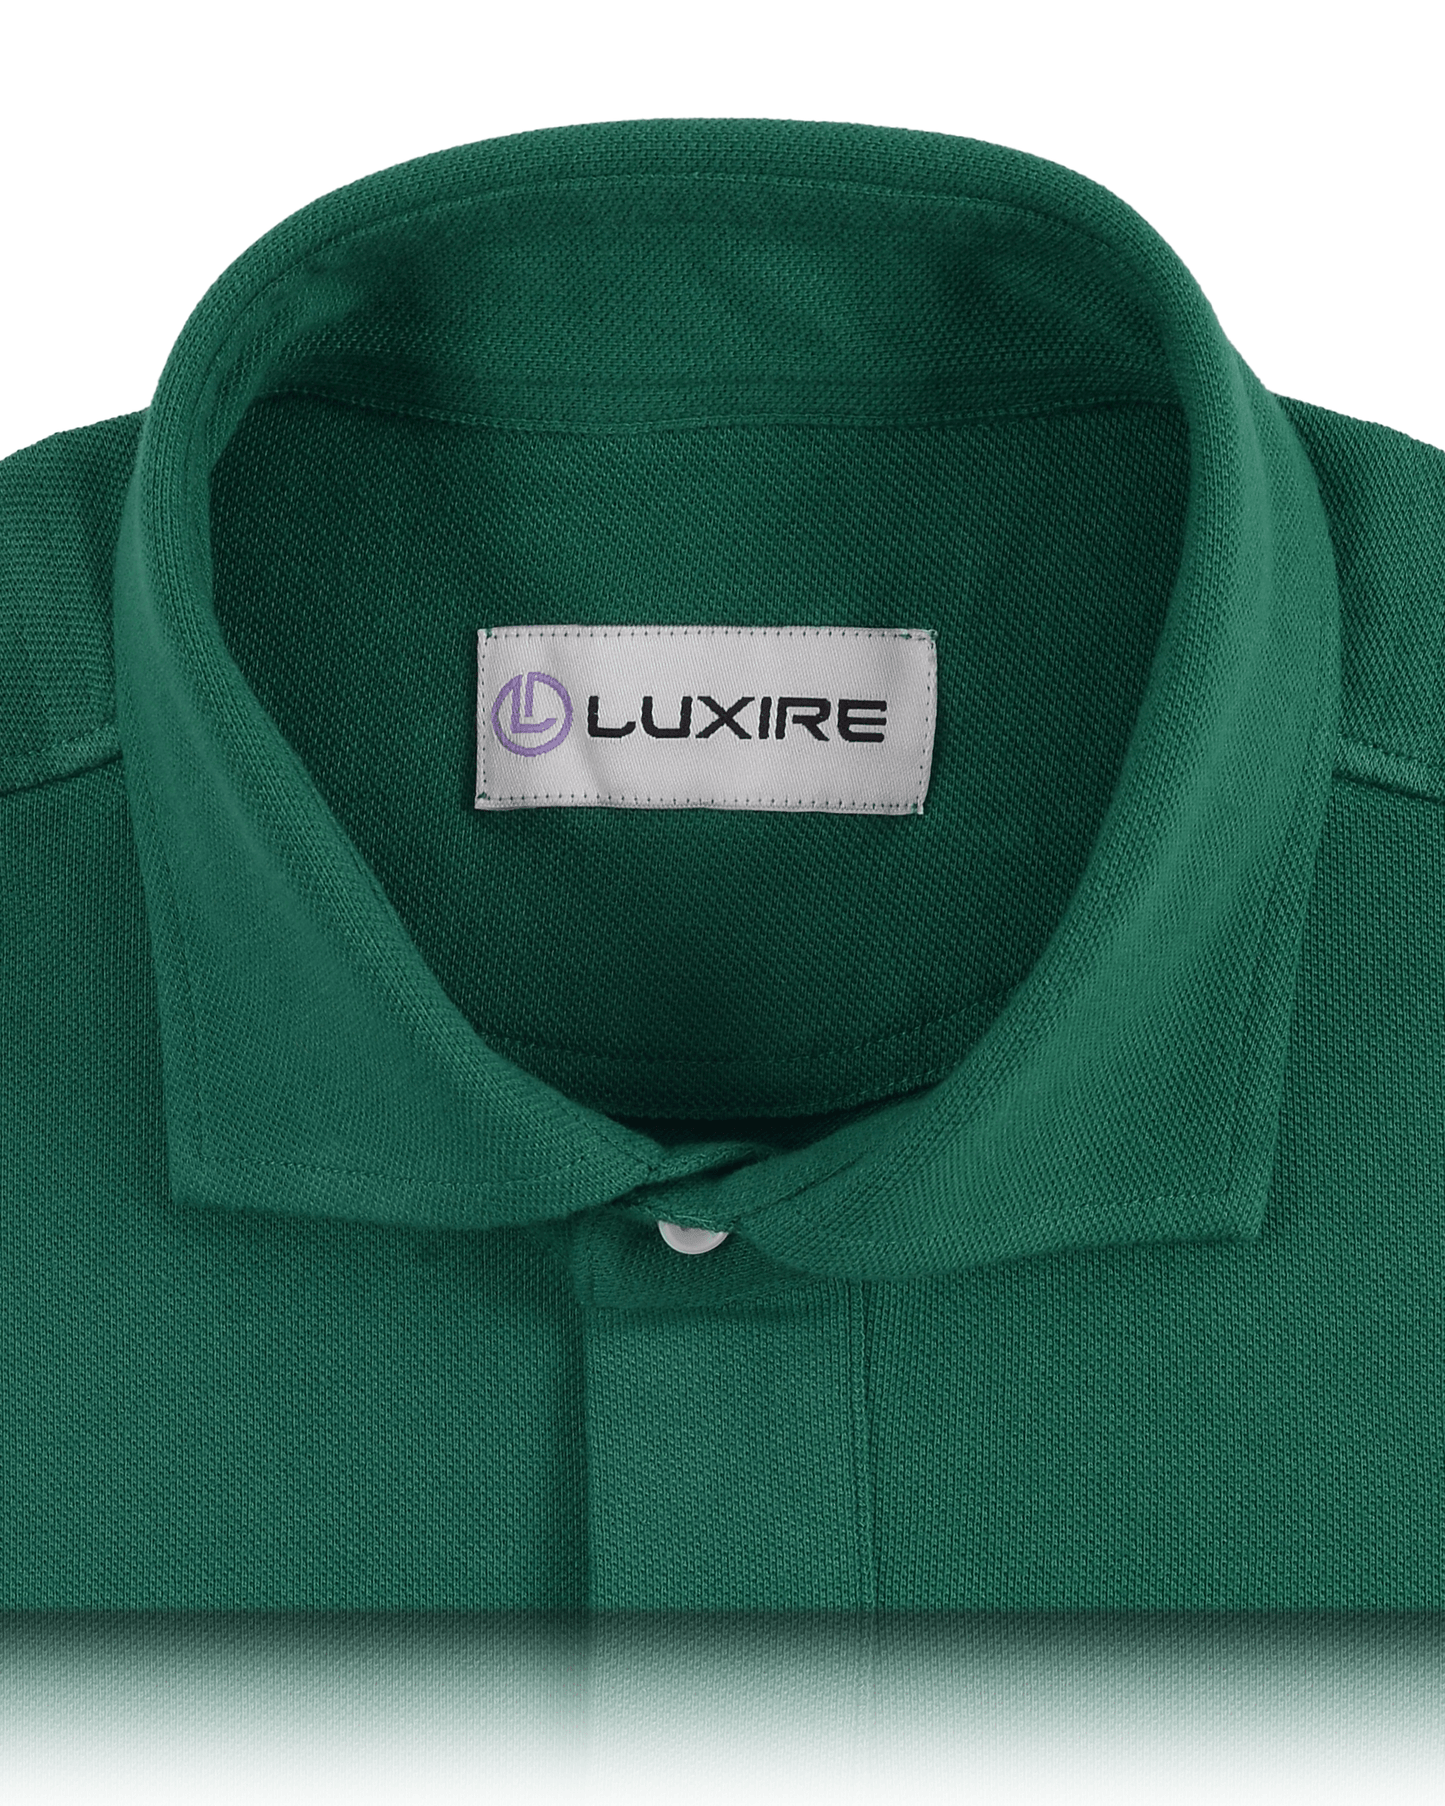 Collar of the custom oxford polo shirt for men by Luxire in racing green